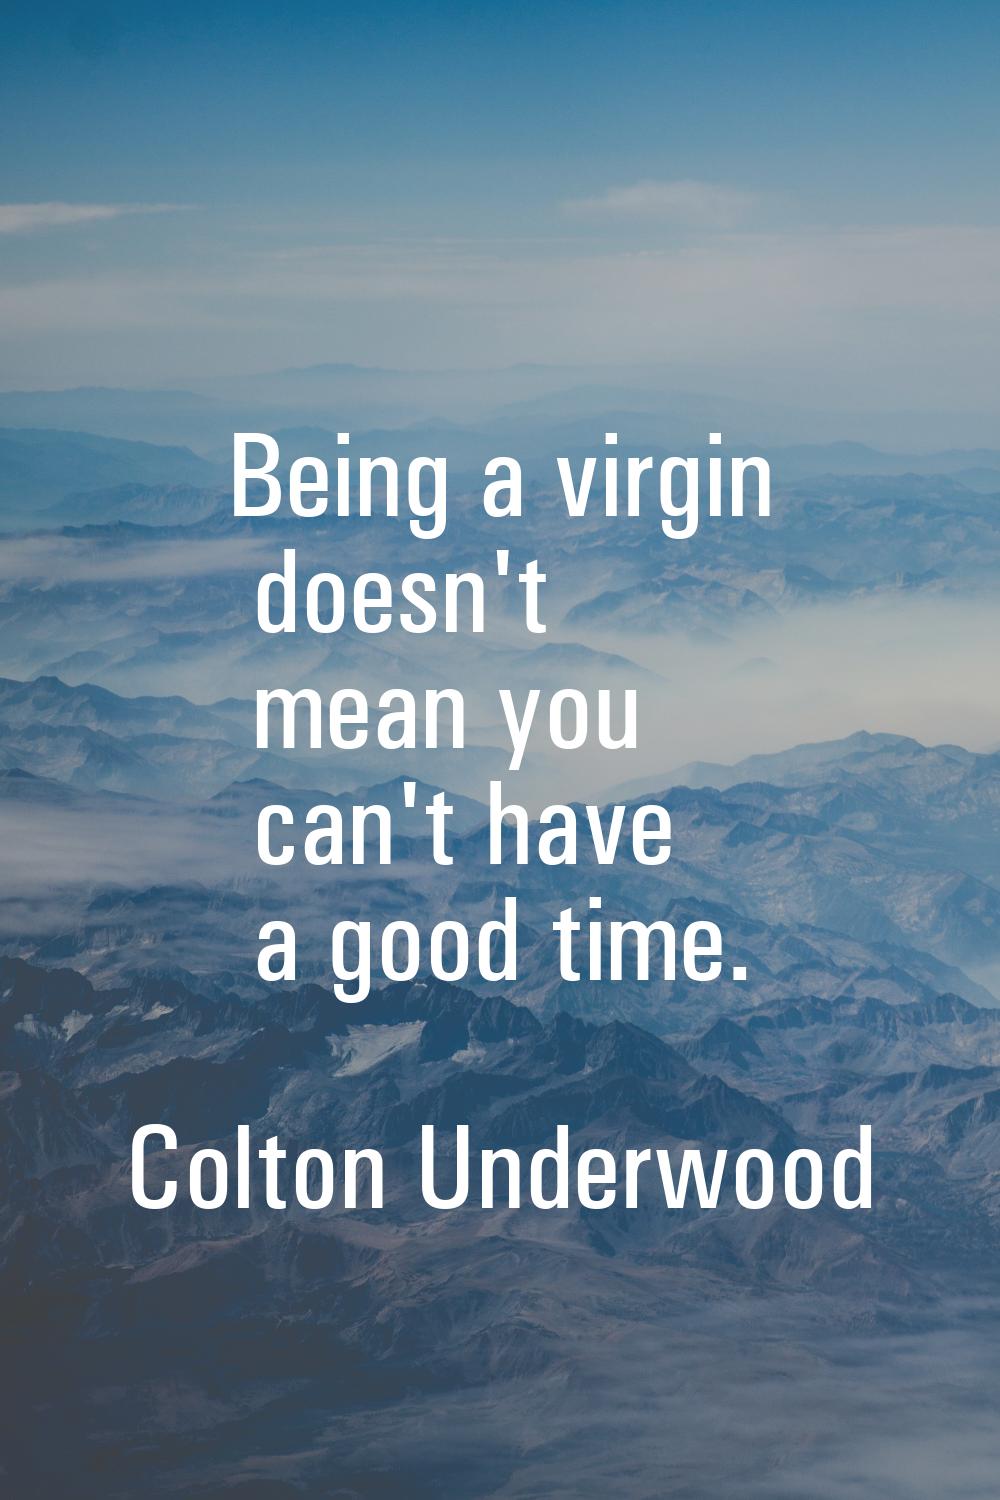 Being a virgin doesn't mean you can't have a good time.